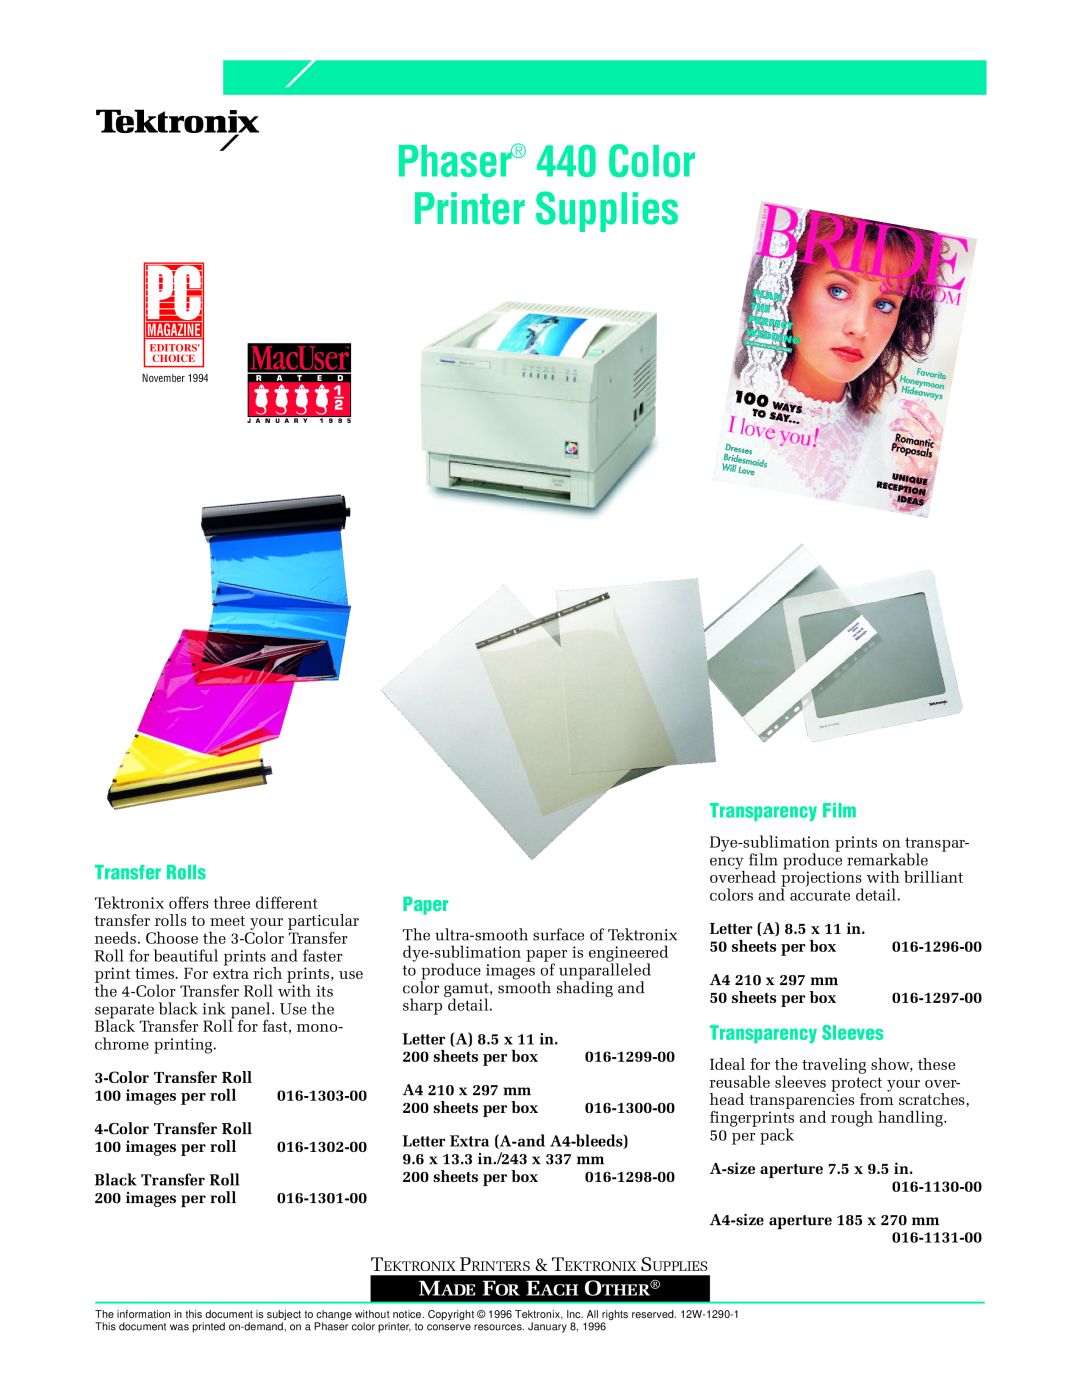 Xerox 436-0279-00 manual Transparency Film, Transfer Rolls, Paper, Transparency Sleeves, Phaser 440 Color Printer Supplies 